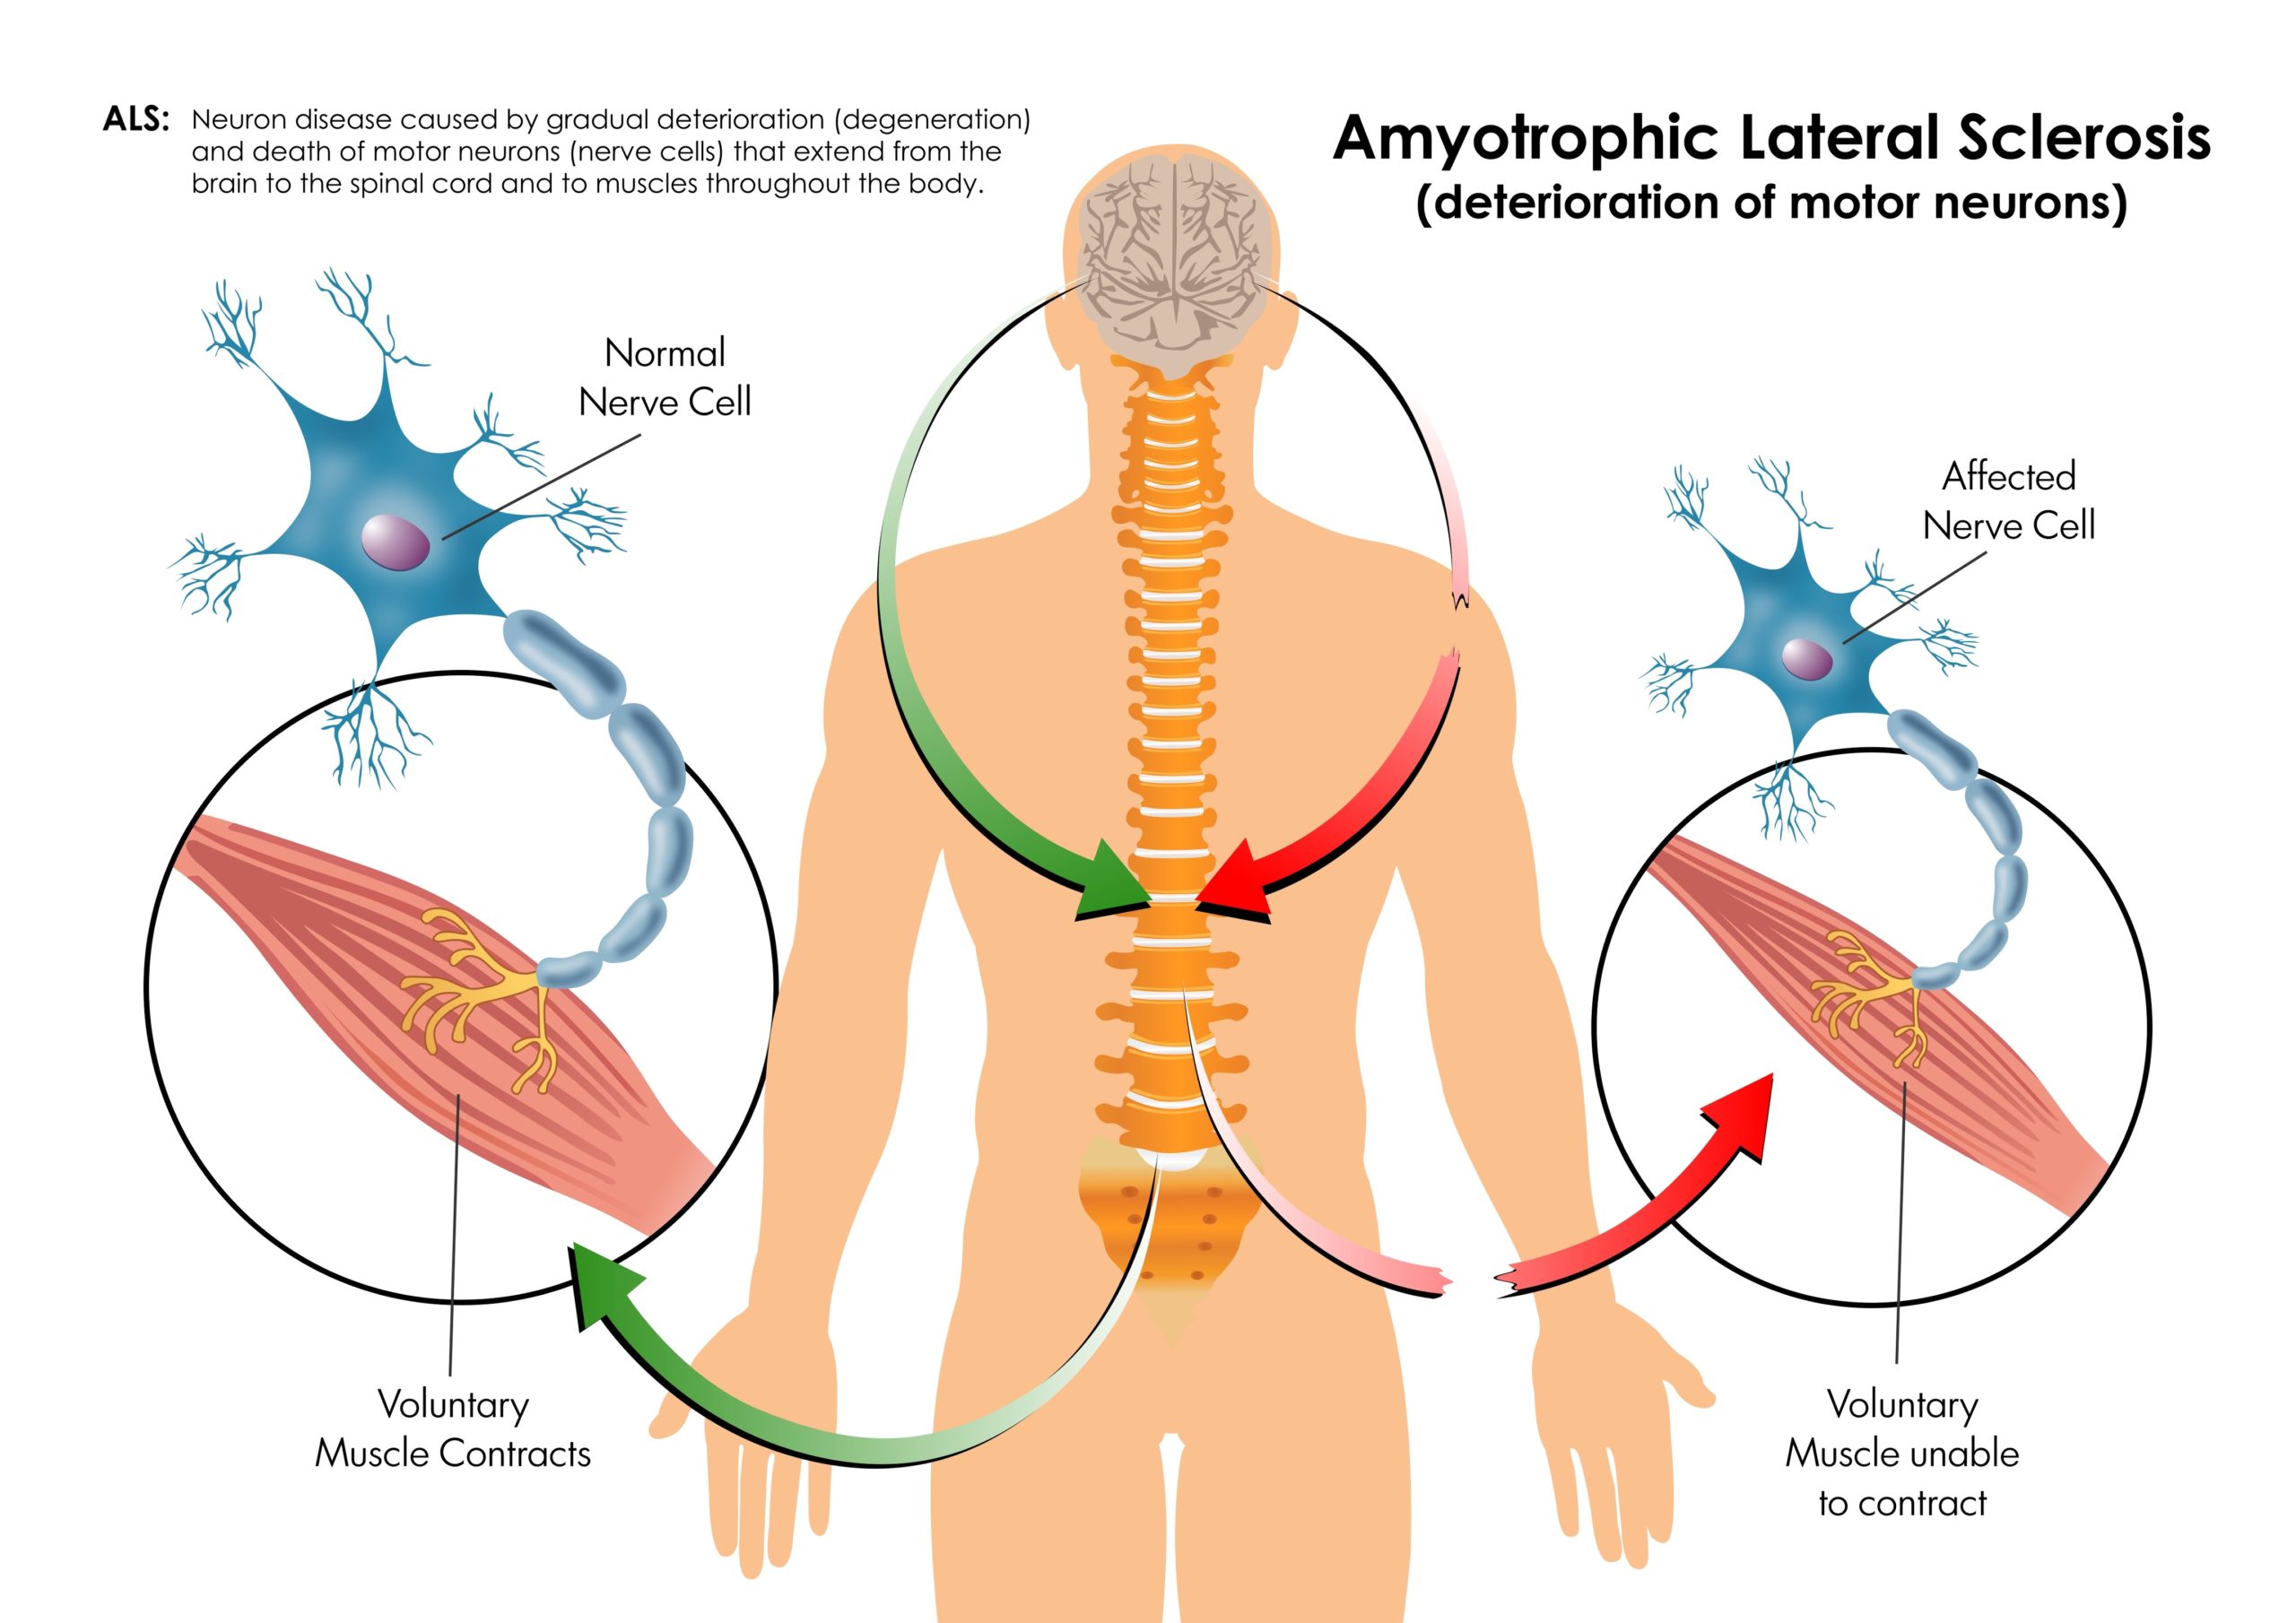 Amyotrophic Lateral Sclerosis ALS is the deterioration of motor neurons that extend from the brain to spinal chord